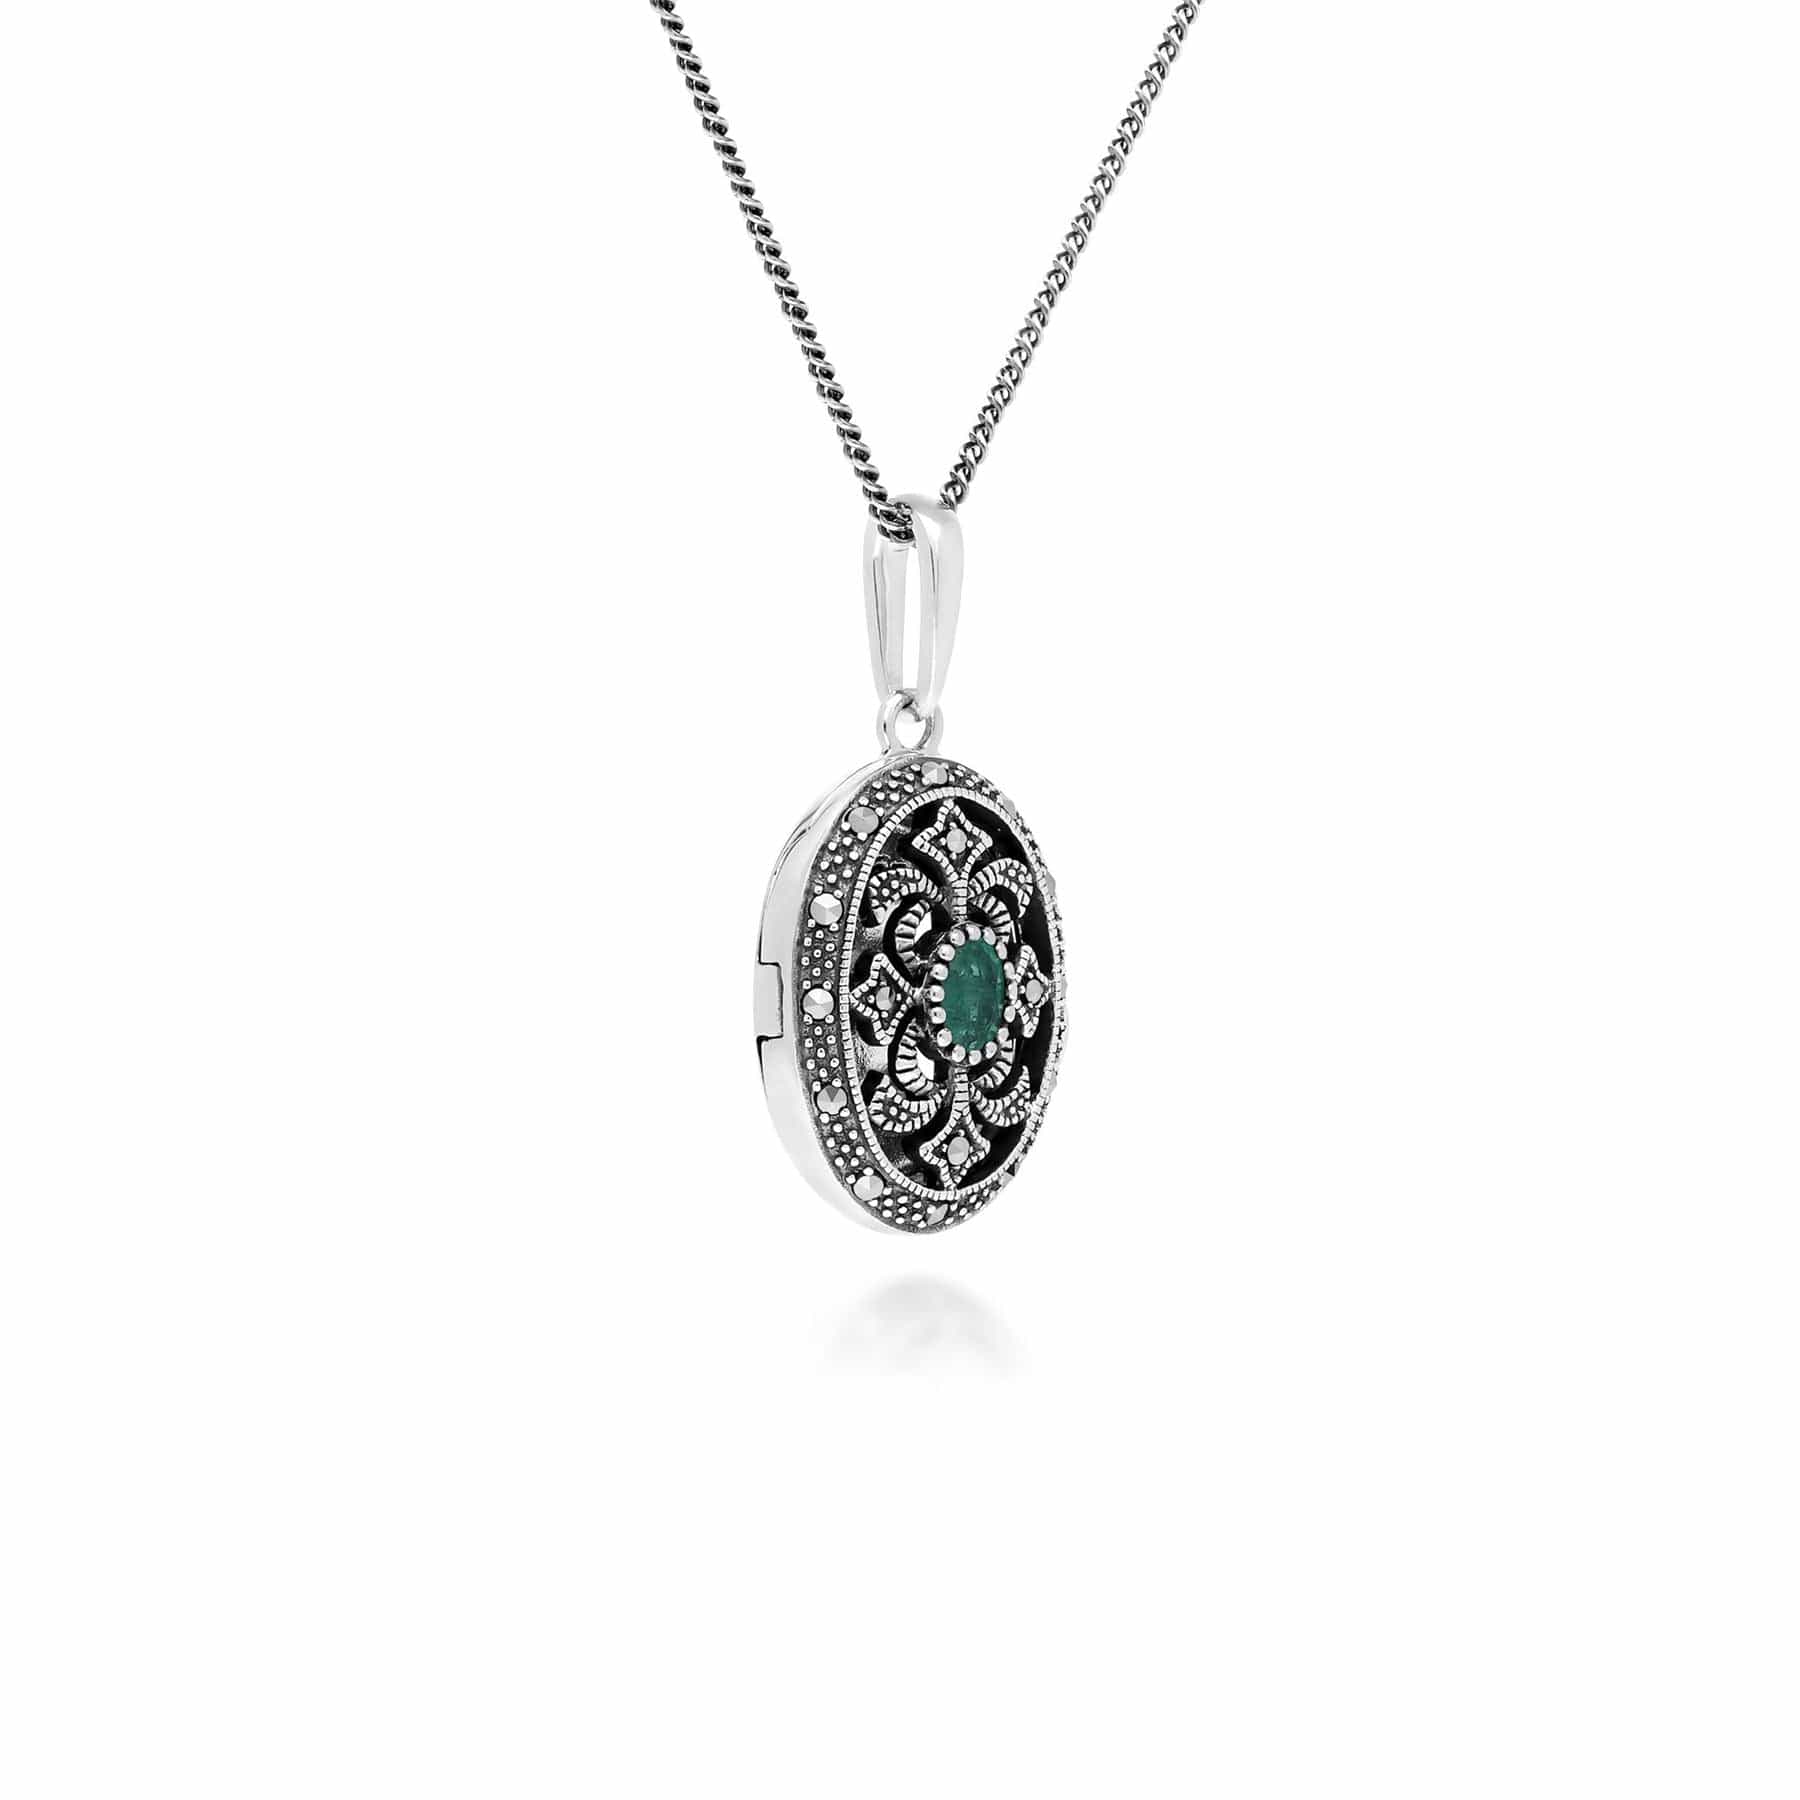 214N716201925 Art Nouveau Style Oval Emerald & Marcasite Locket Necklace in 925 Sterling Silver 2